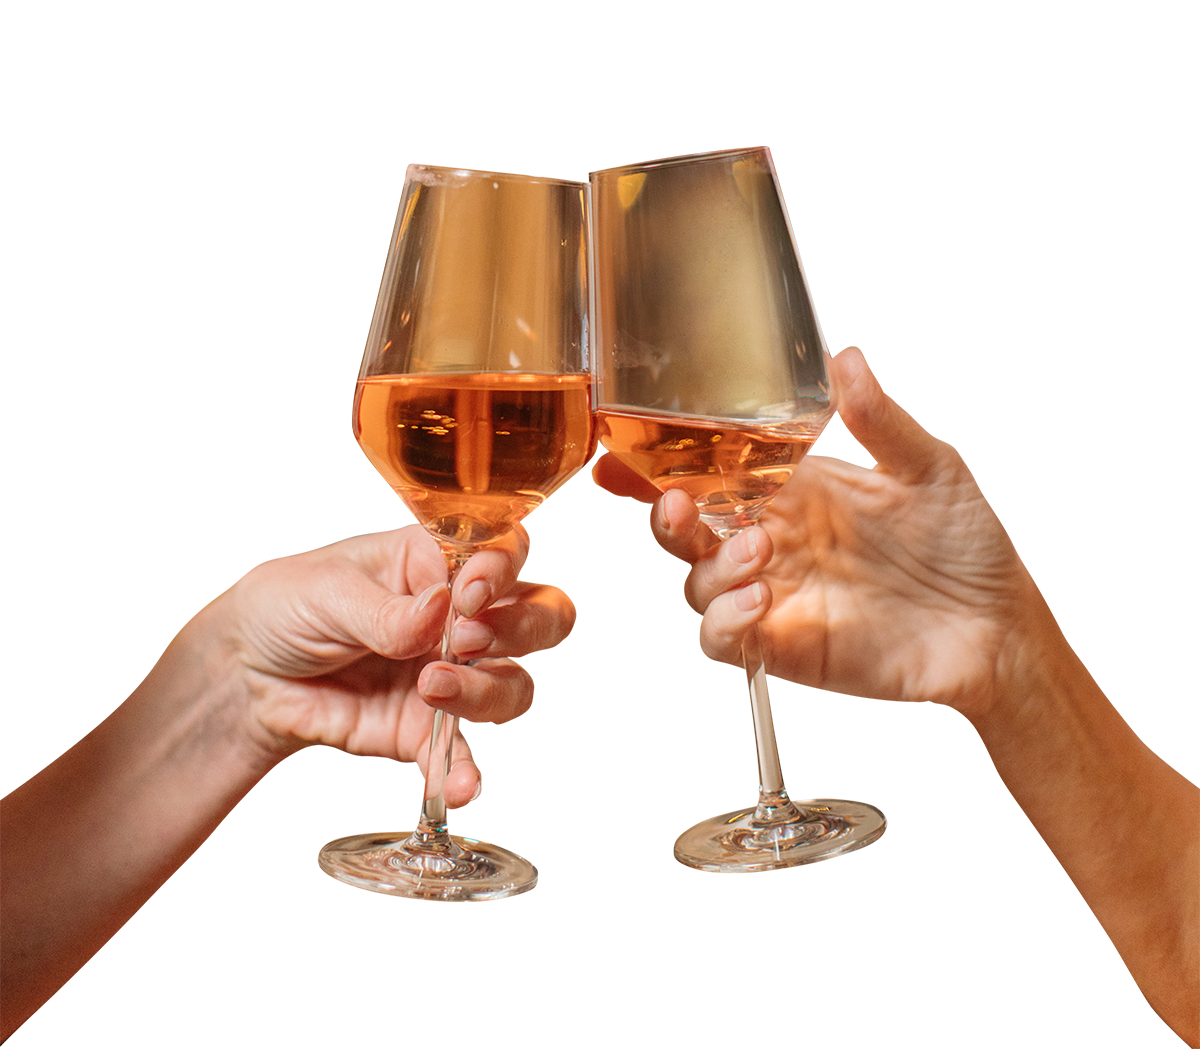 cheers image, Cheers png, transparent Cheers png, Cheers PNG image, Cheers, Celebration Cheers png hd images download (4)